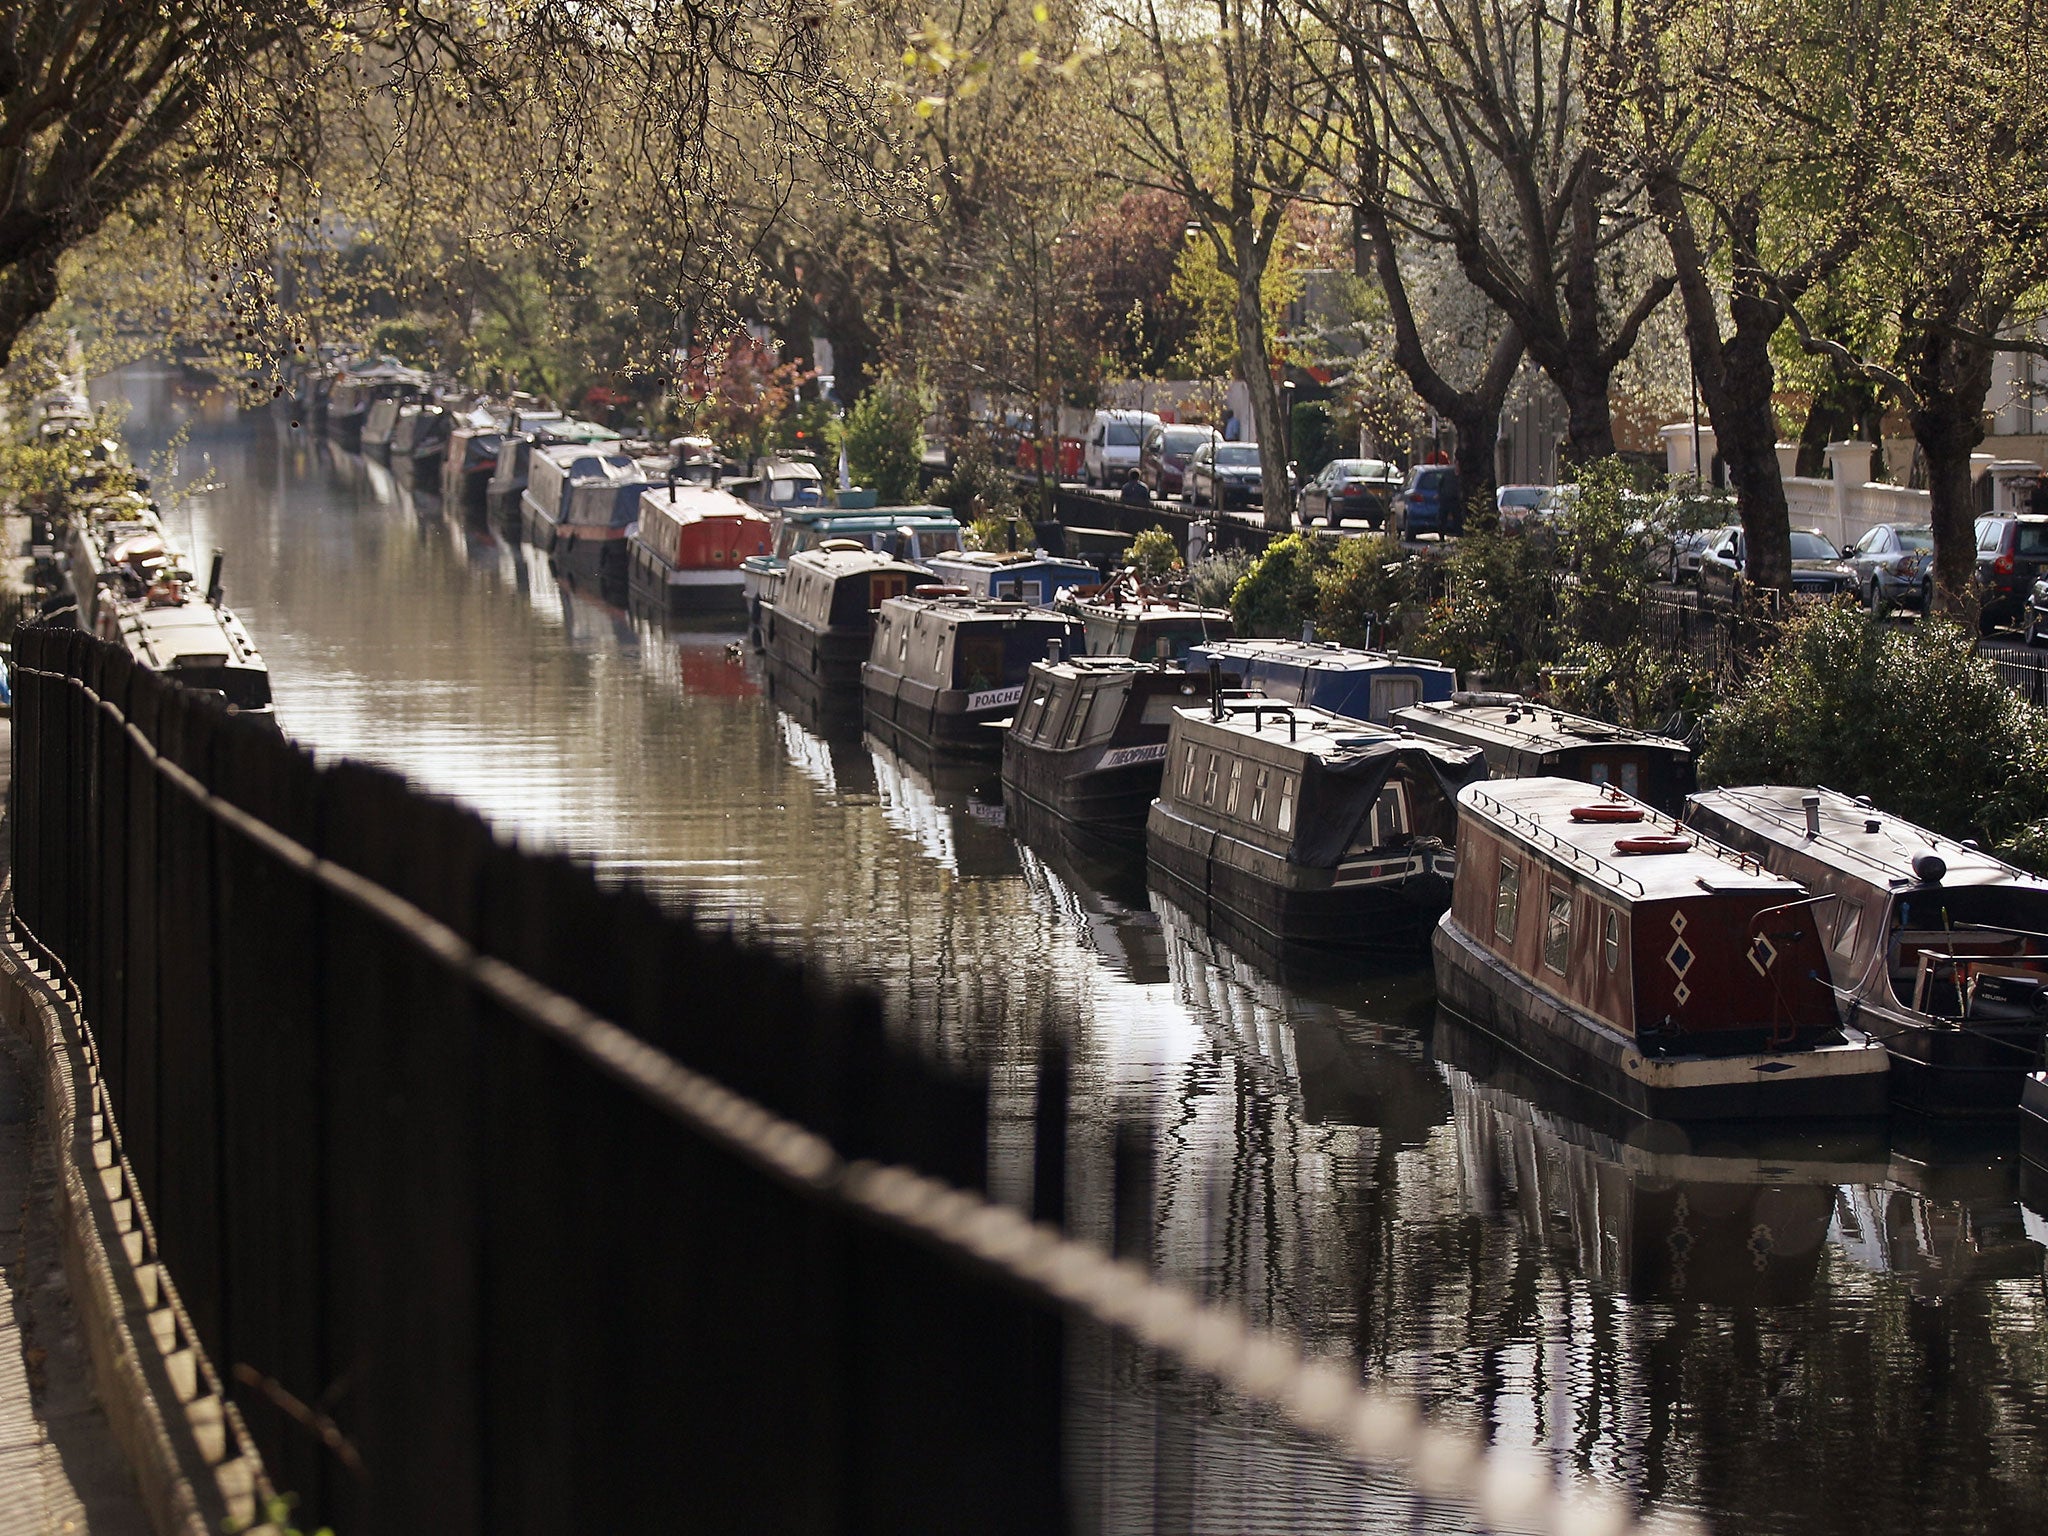 Narrow boats line the Regent's Canal in London, England